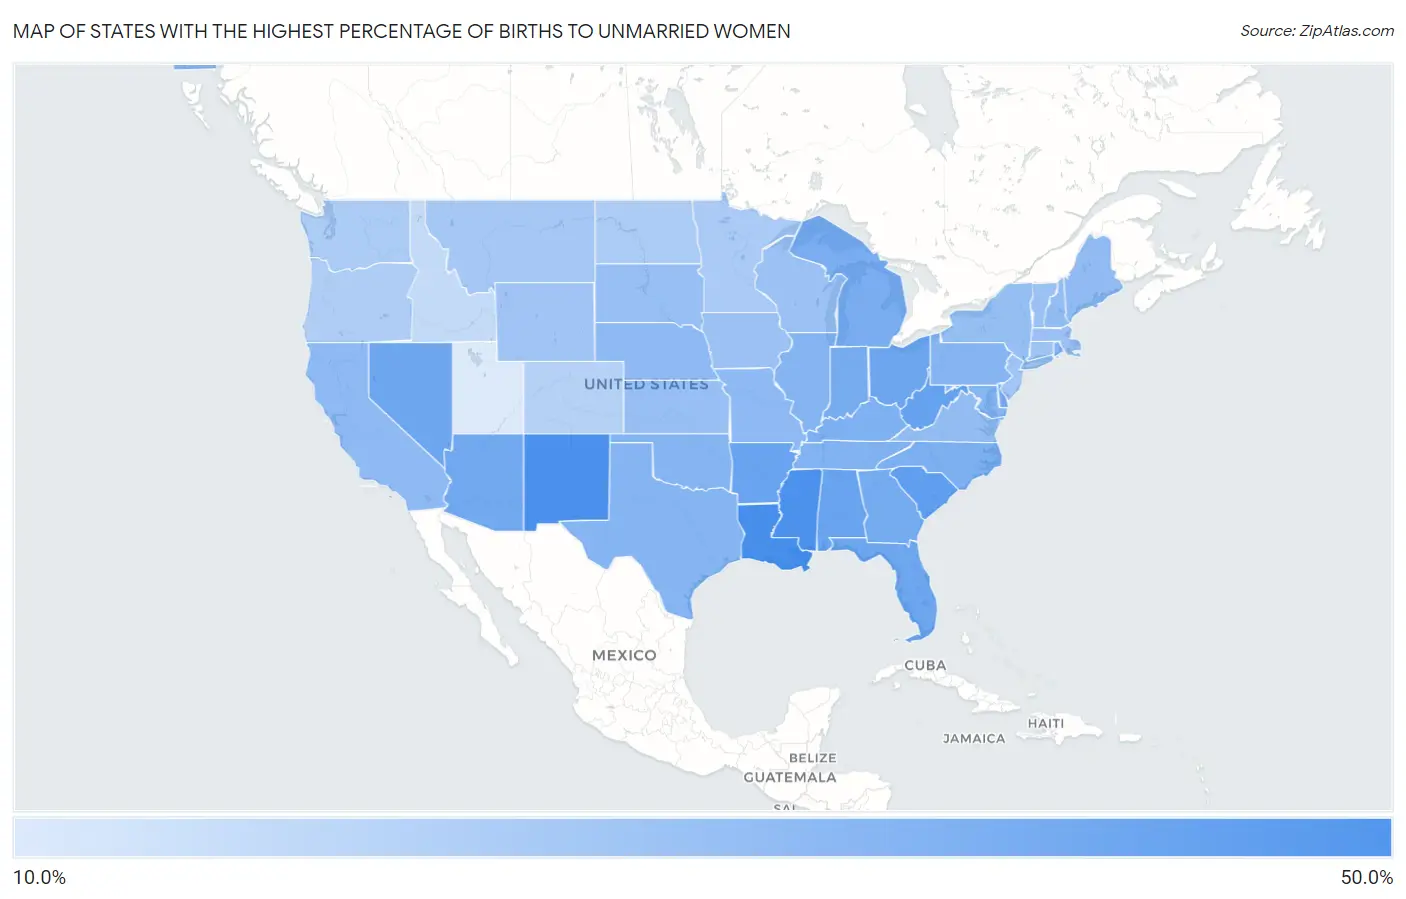 States with the Highest Percentage of Births to Unmarried Women in the United States Map